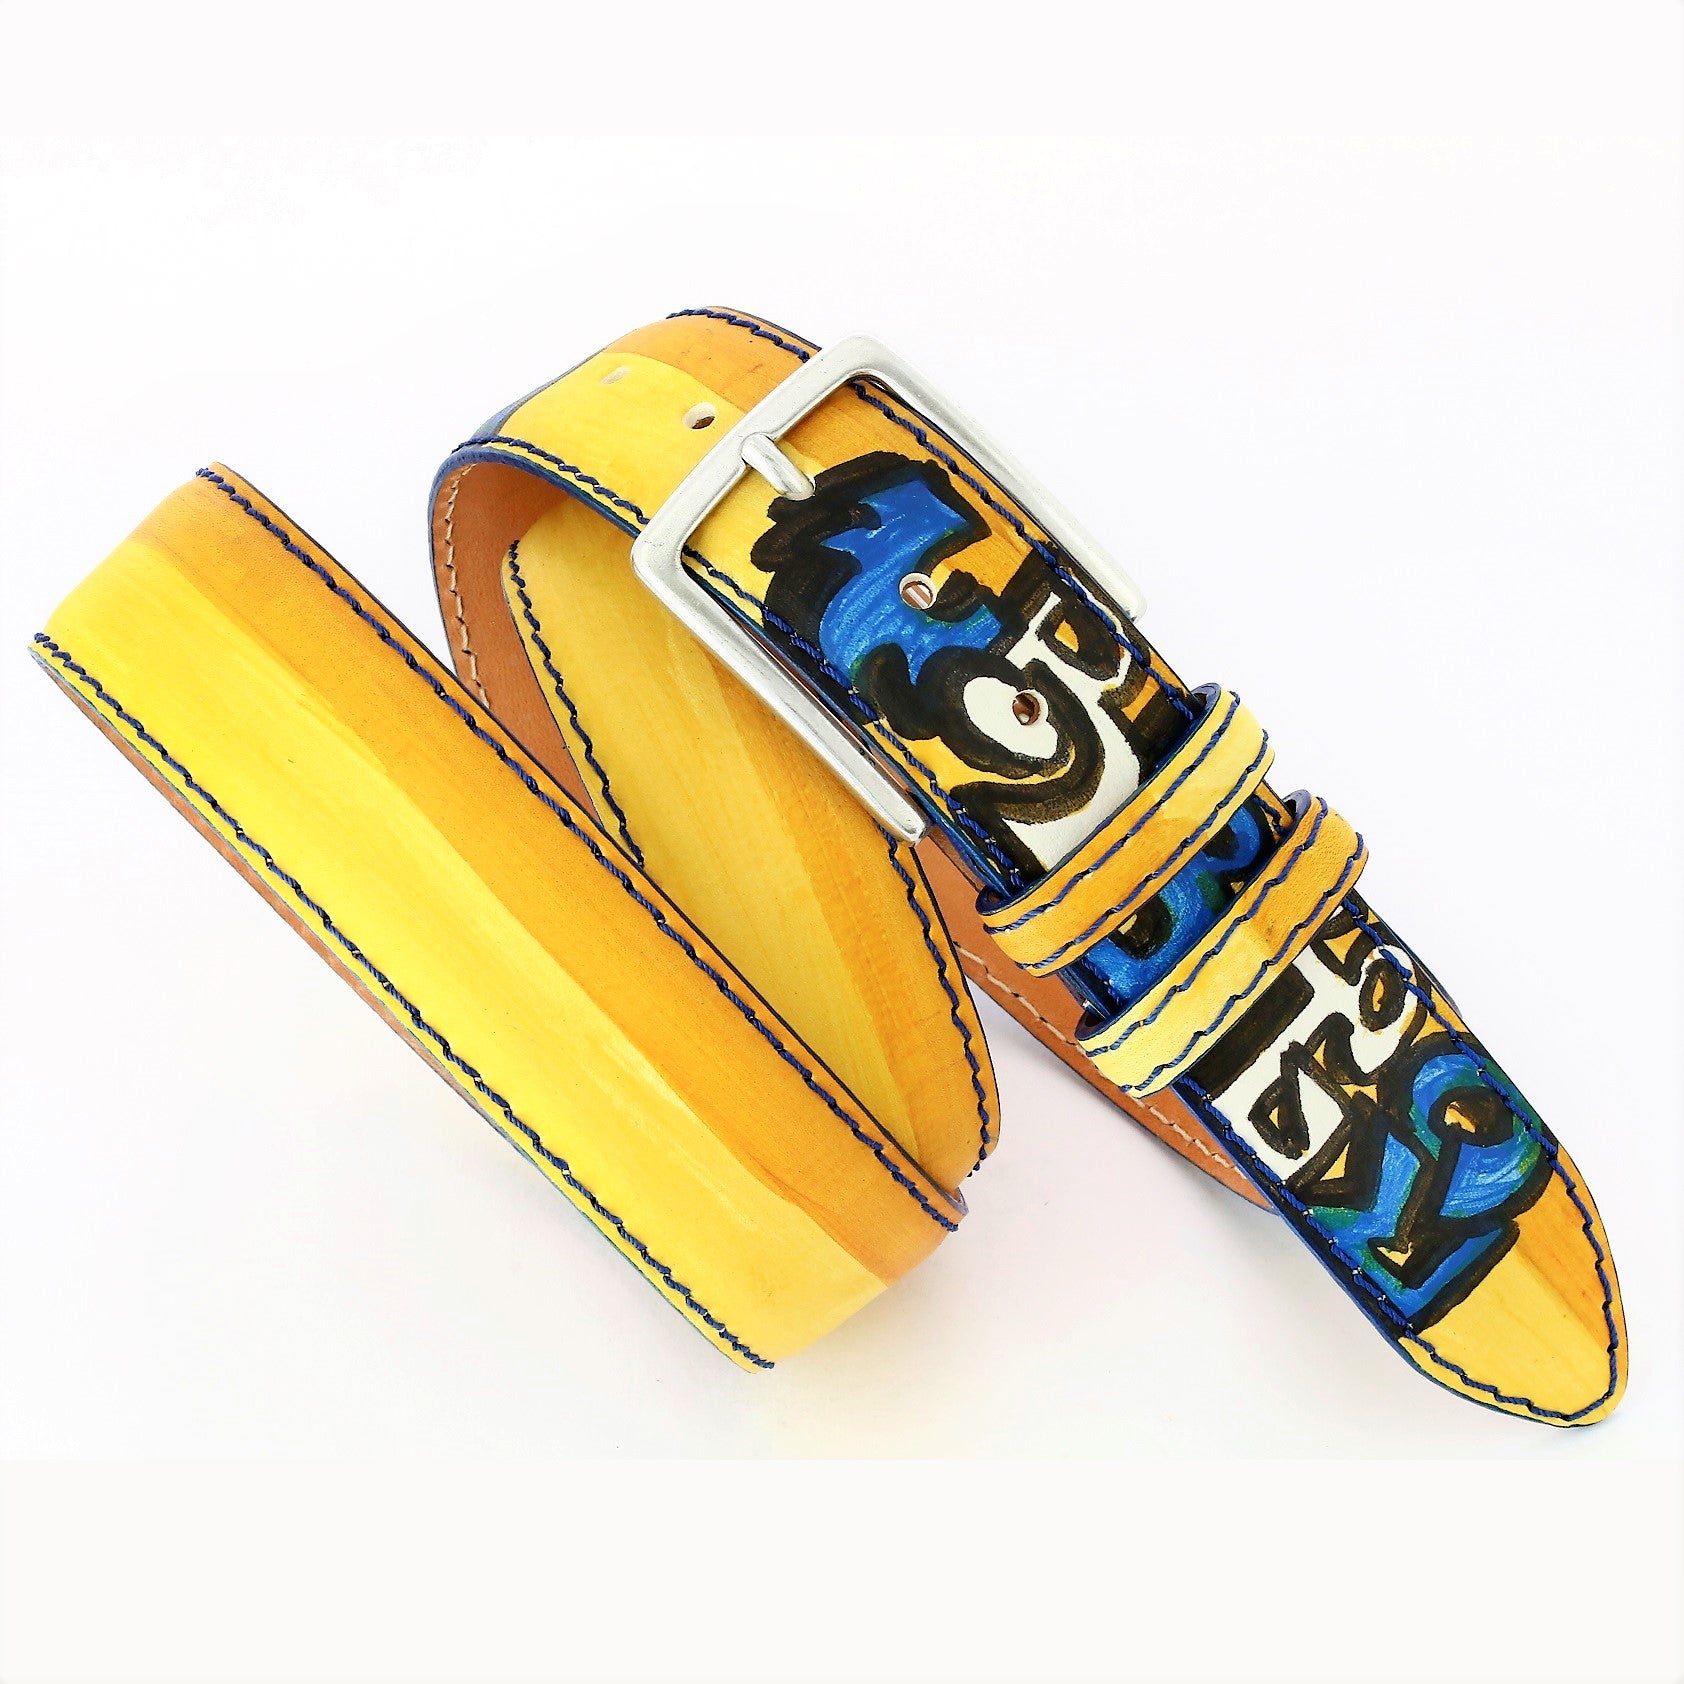 hand painted belt with a graffiti style blue and white  writing on a yellow background